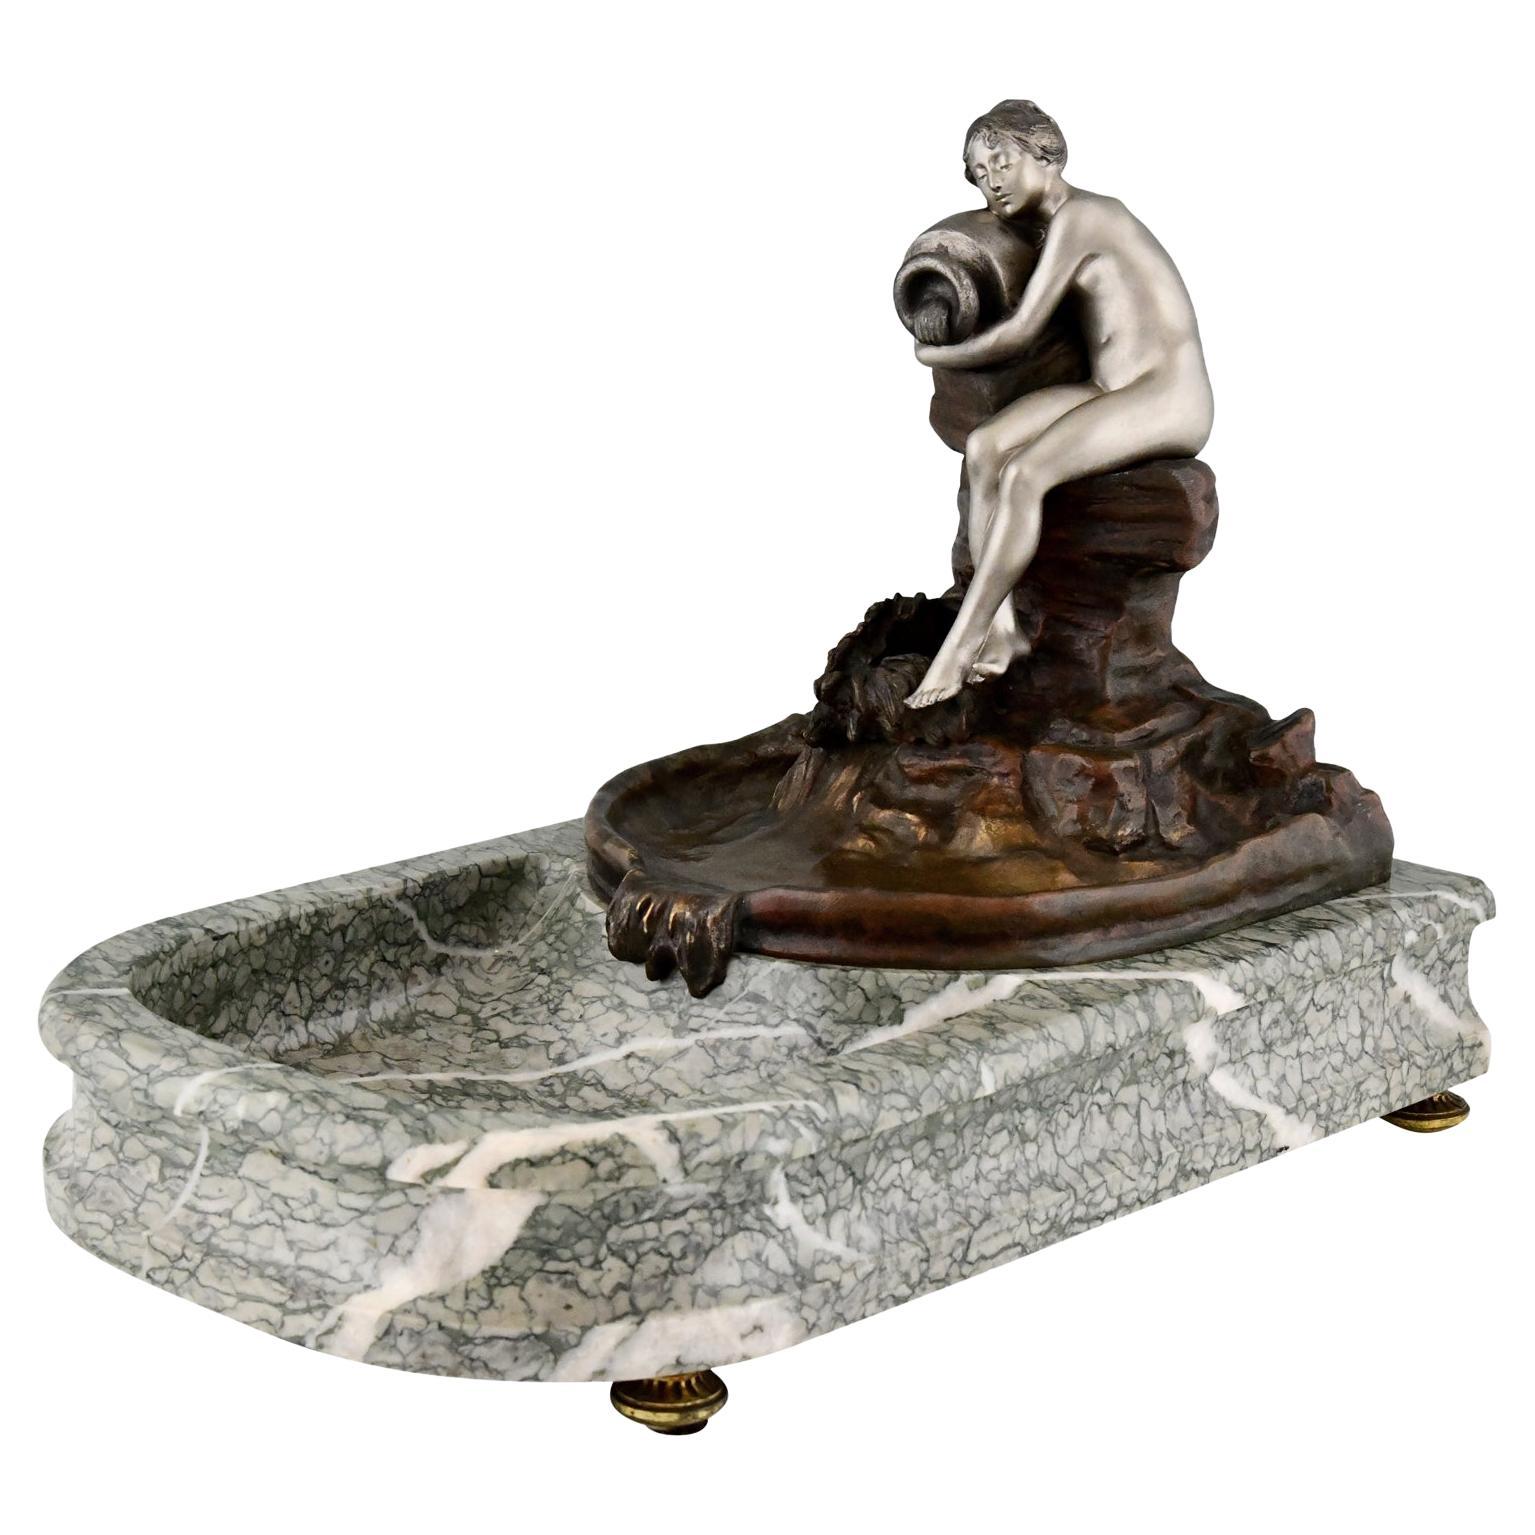 Art Nouveau Bronze Sculptural Tray Indoor Fountain with Nude by Suzanne Bizard